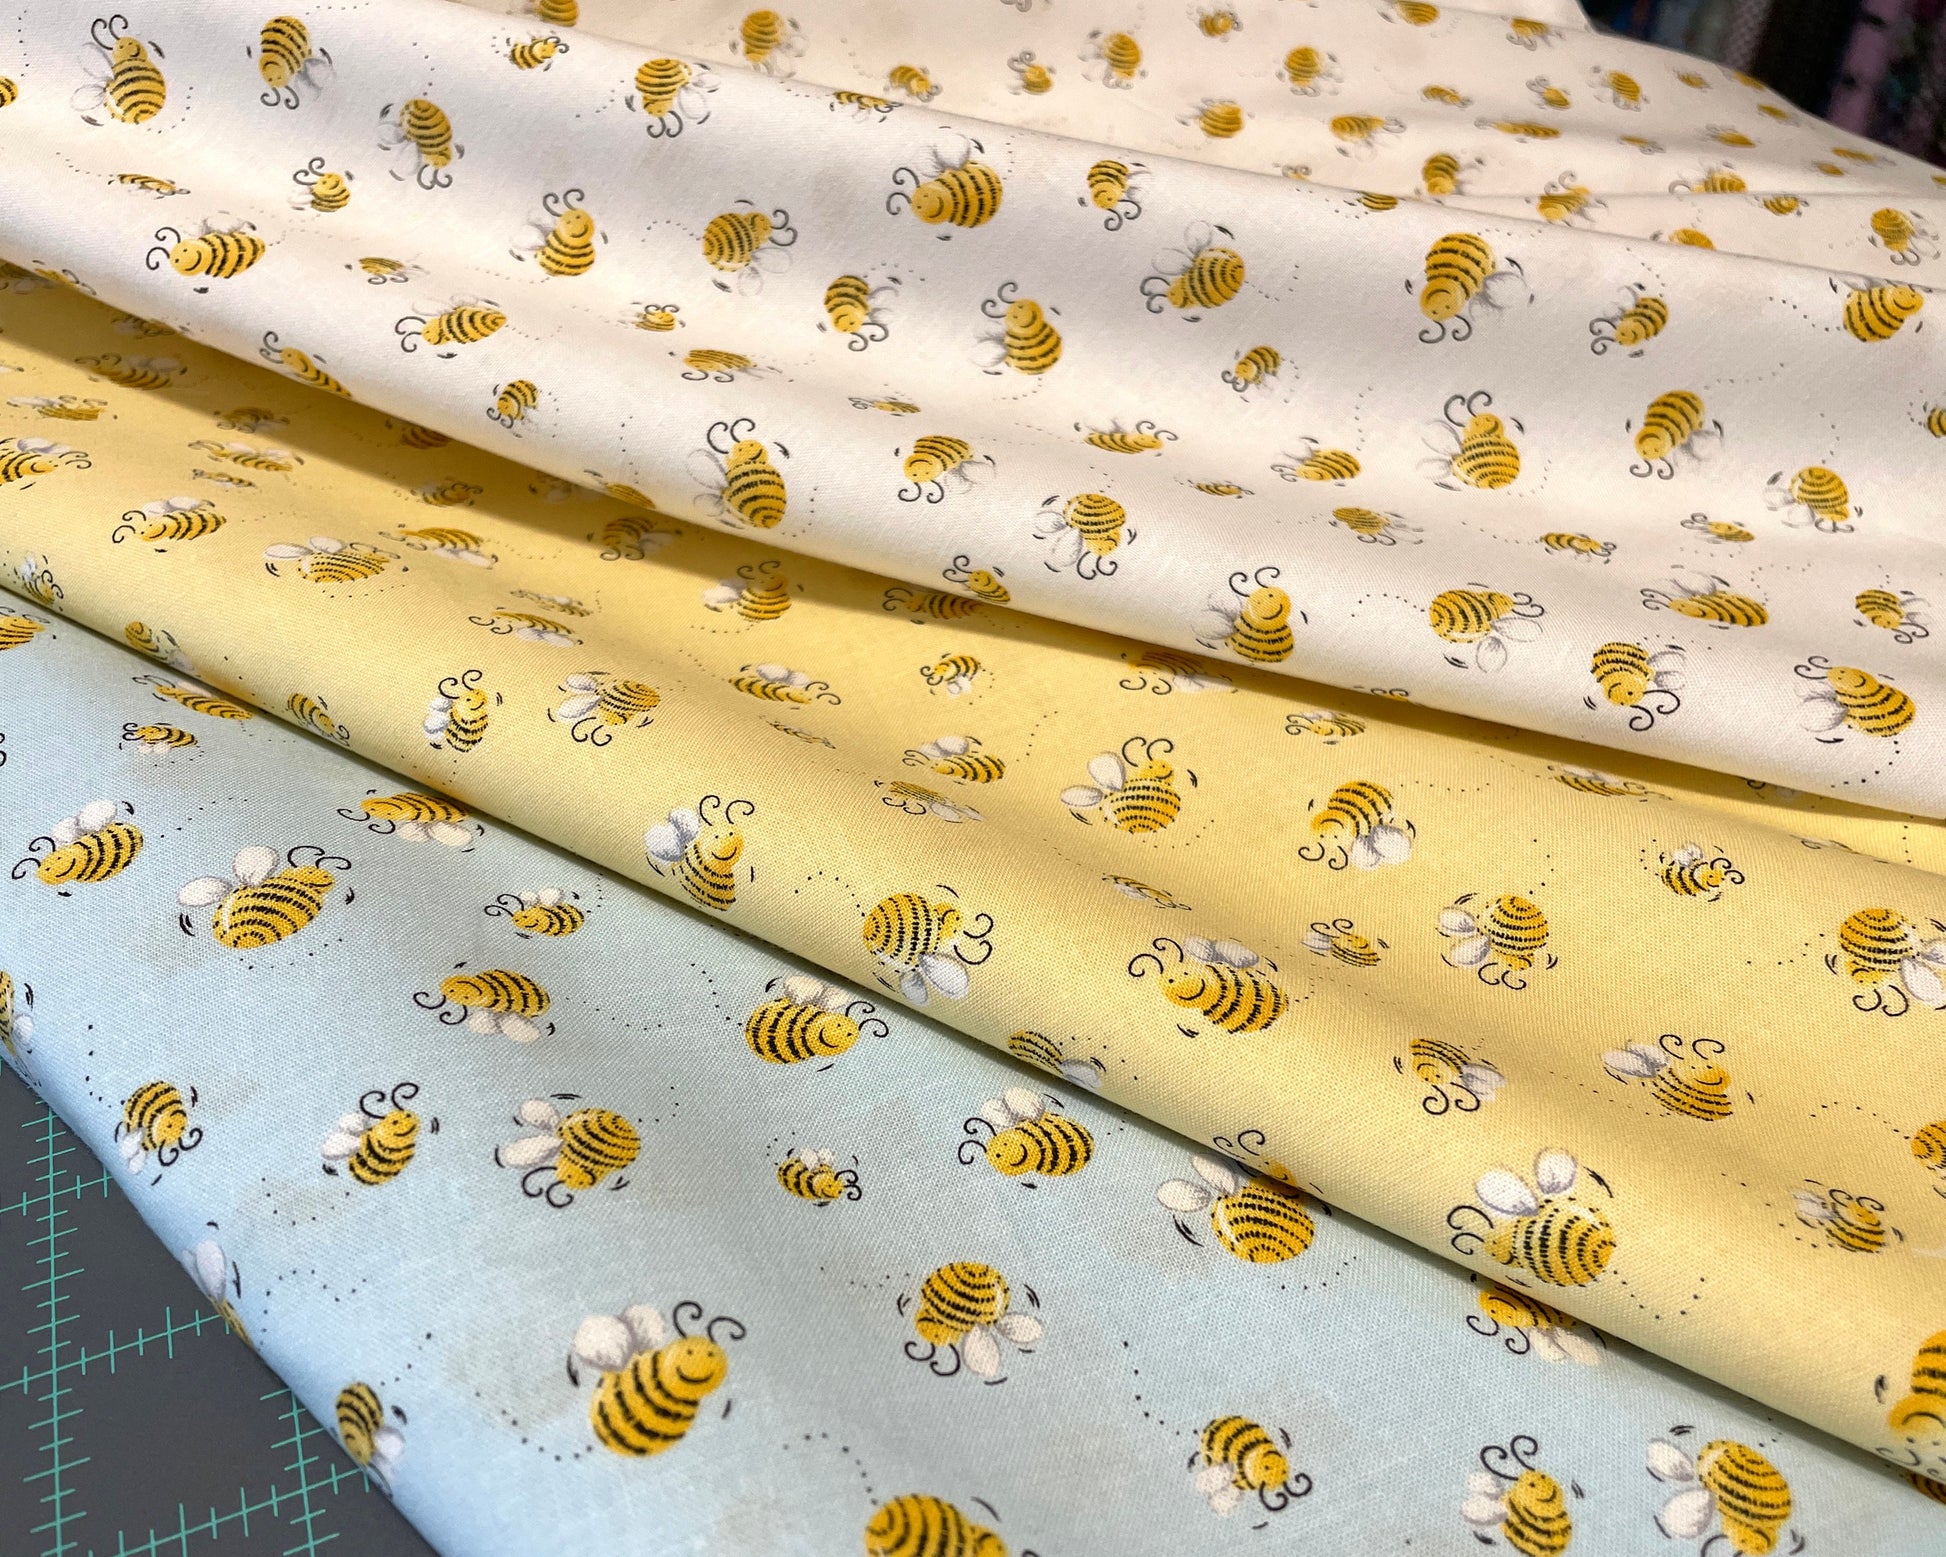 Susybee fabric by the yard - Yellow